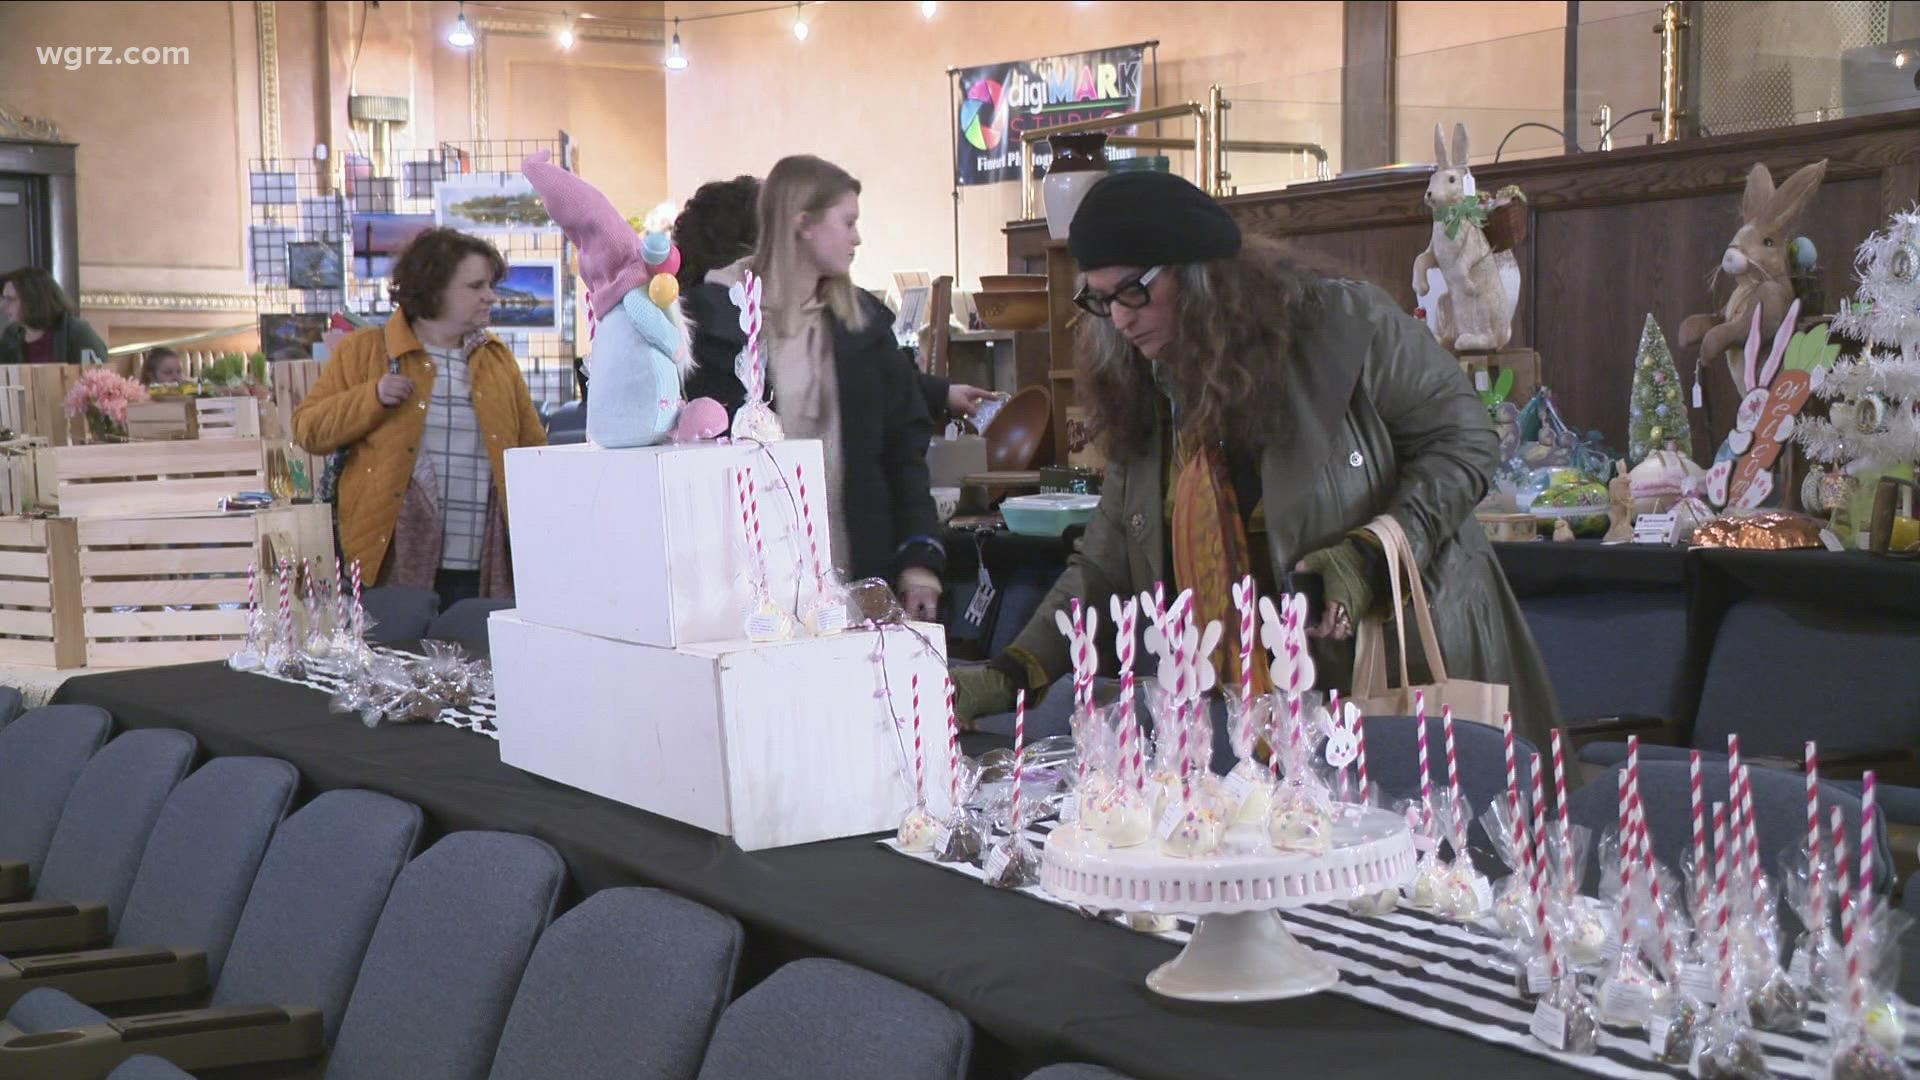 Rustic Buffalo Artisan Market is celebrating the Palace Theater by turning it into a store front! 120 local vendors setup shop for the weekend to help raise funds.